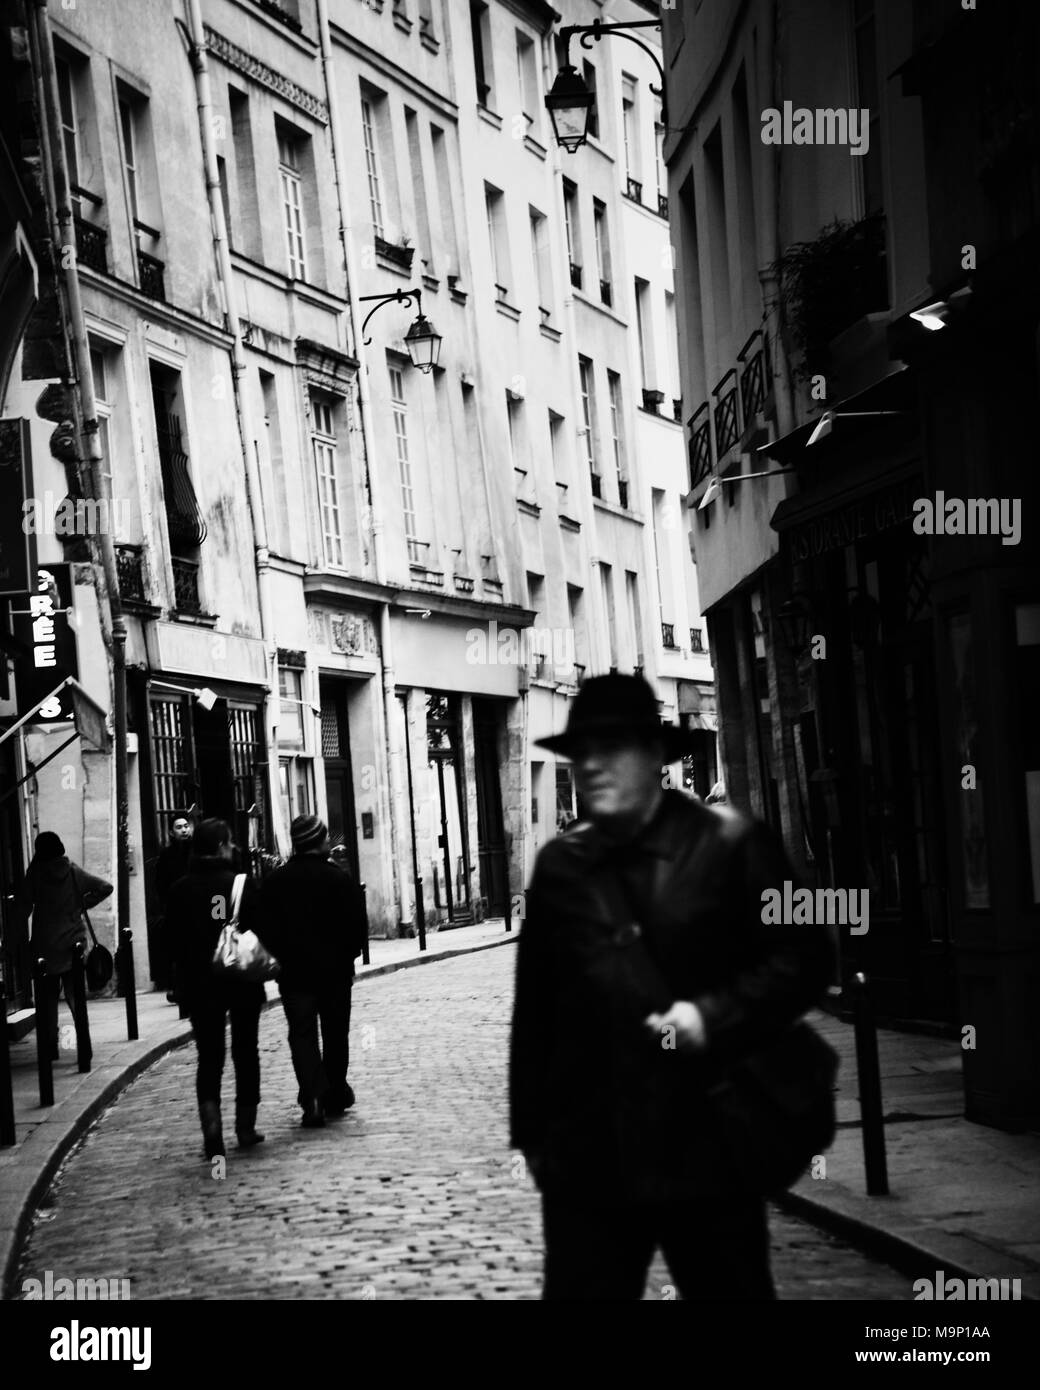 Typical narrow cobblestone street in Paris with a man in the foreground. Stock Photo